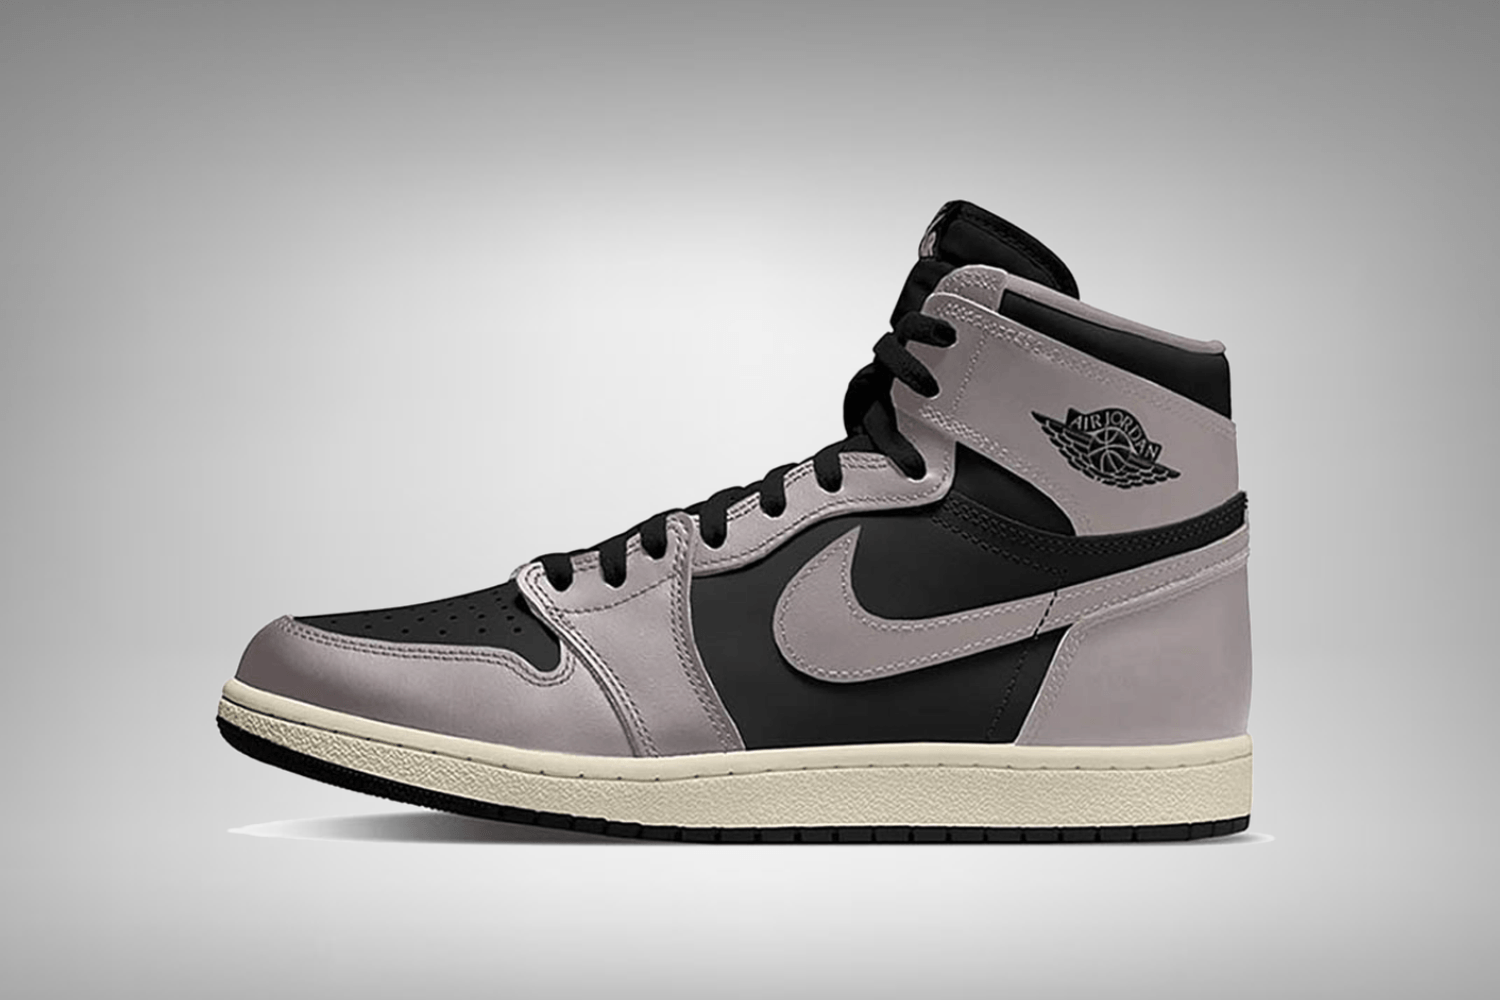 Air Jordan 1 '85 'Reverse Shadow' drops 40 years later after all